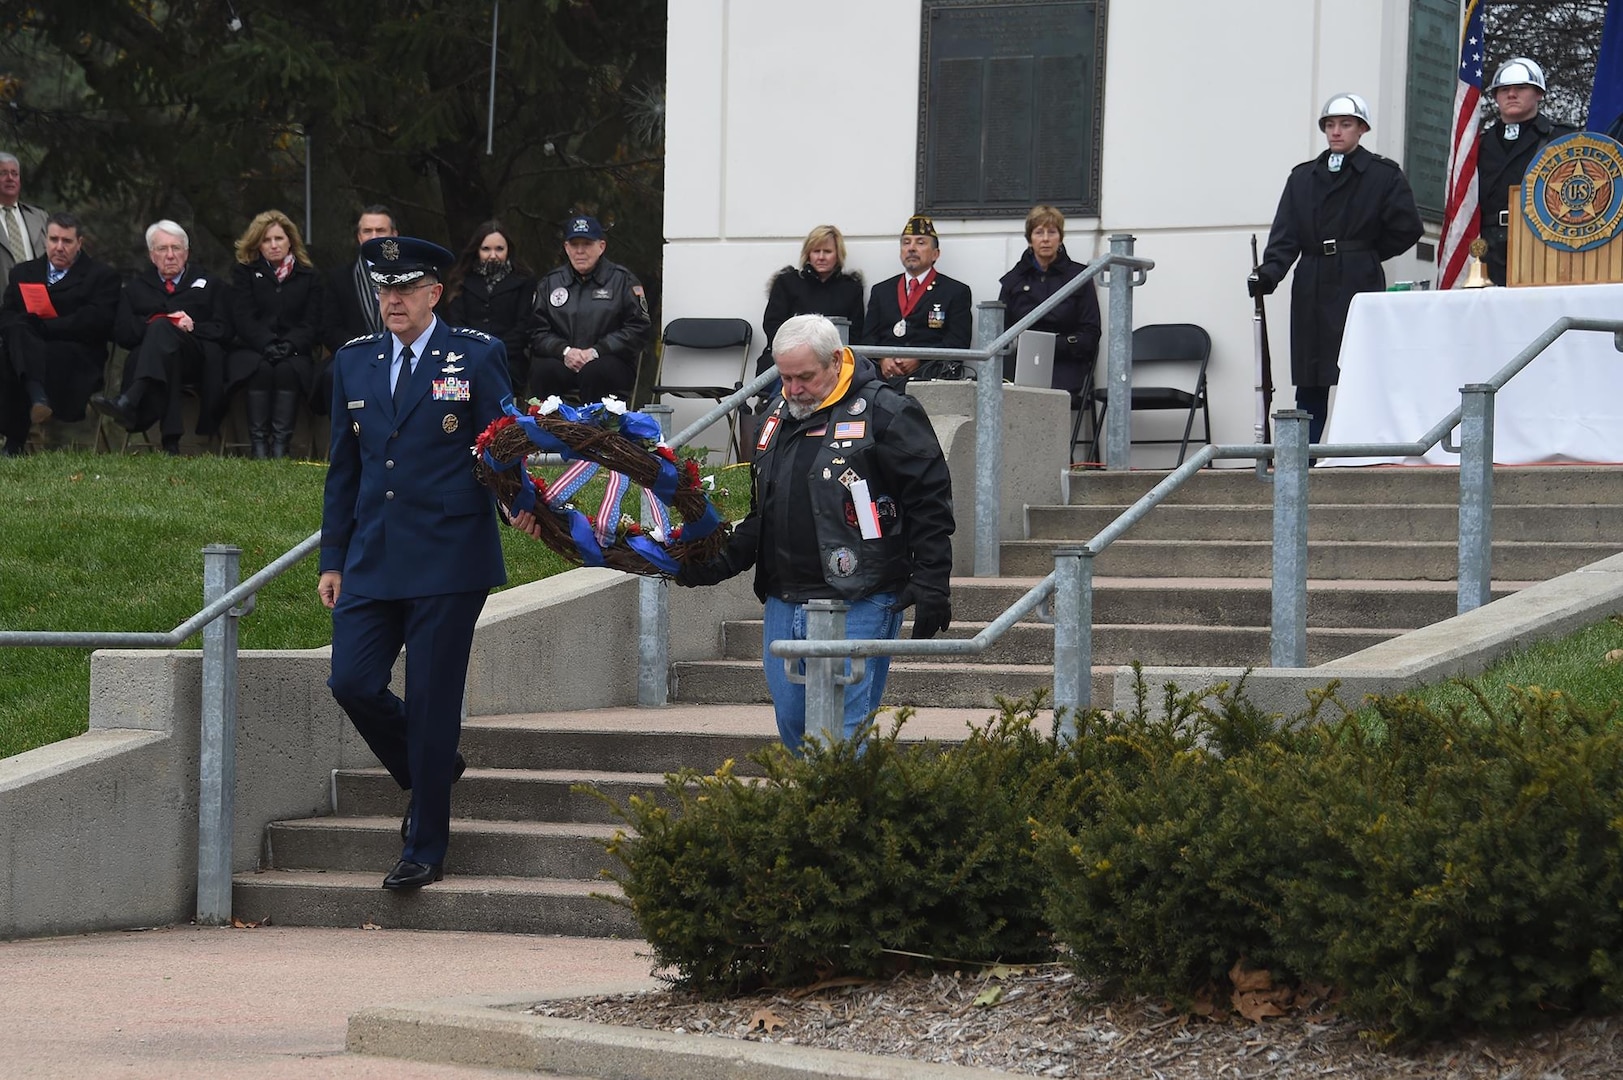 U.S. Air Force Gen. John Hyten, commander of U.S. Strategic Command, and Lonnie Ford, a Gold Star father, carry a wreath during a Veterans Day ceremony at Memorial Park in Omaha, Neb., Nov. 11, 2017. Ford’s son, U.S. Army Sgt. Joshua Ford, was killed July 31, 2000, during combat operations in Al Numaniyah, Iraq. More than 200 people attended the ceremony to honor the service and sacrifice of American veterans and their families.